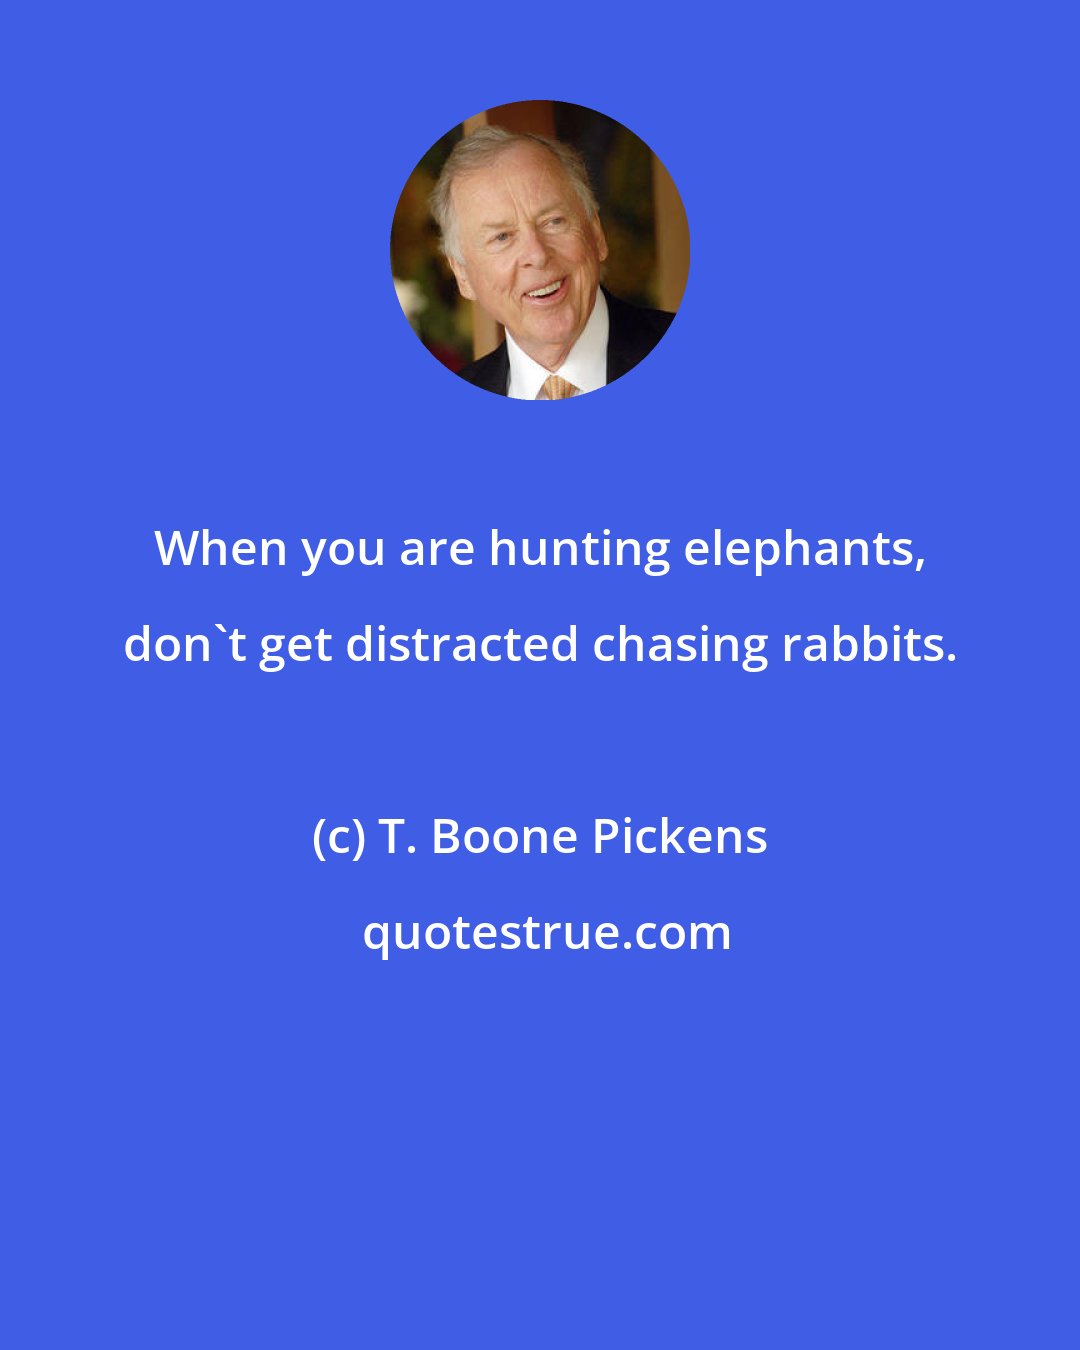 T. Boone Pickens: When you are hunting elephants, don't get distracted chasing rabbits.